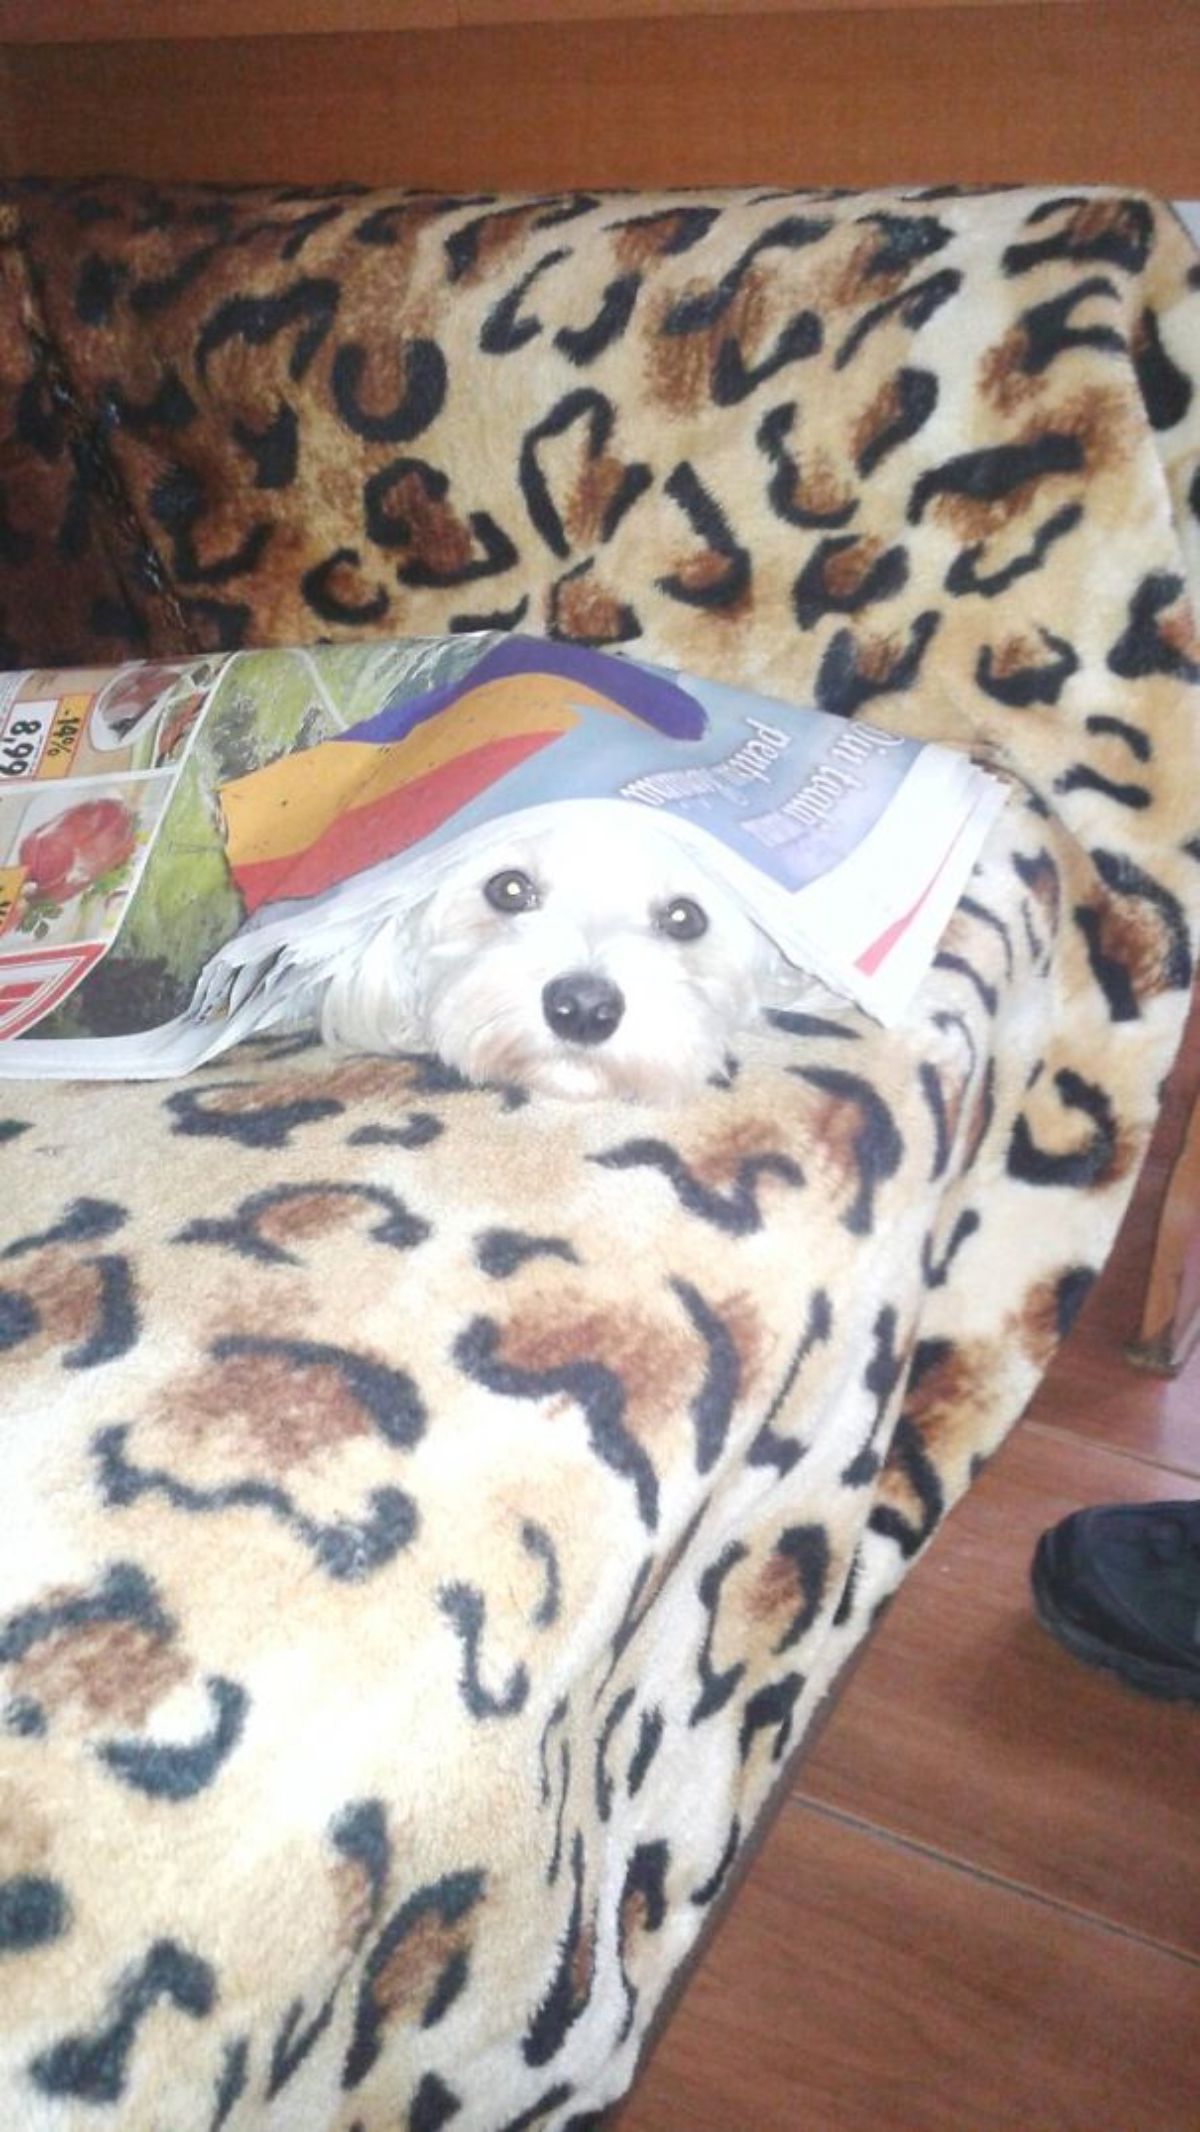 white fluffy dog laying on a brown and black leopard print blanket and the dog is hiding under a newspaper